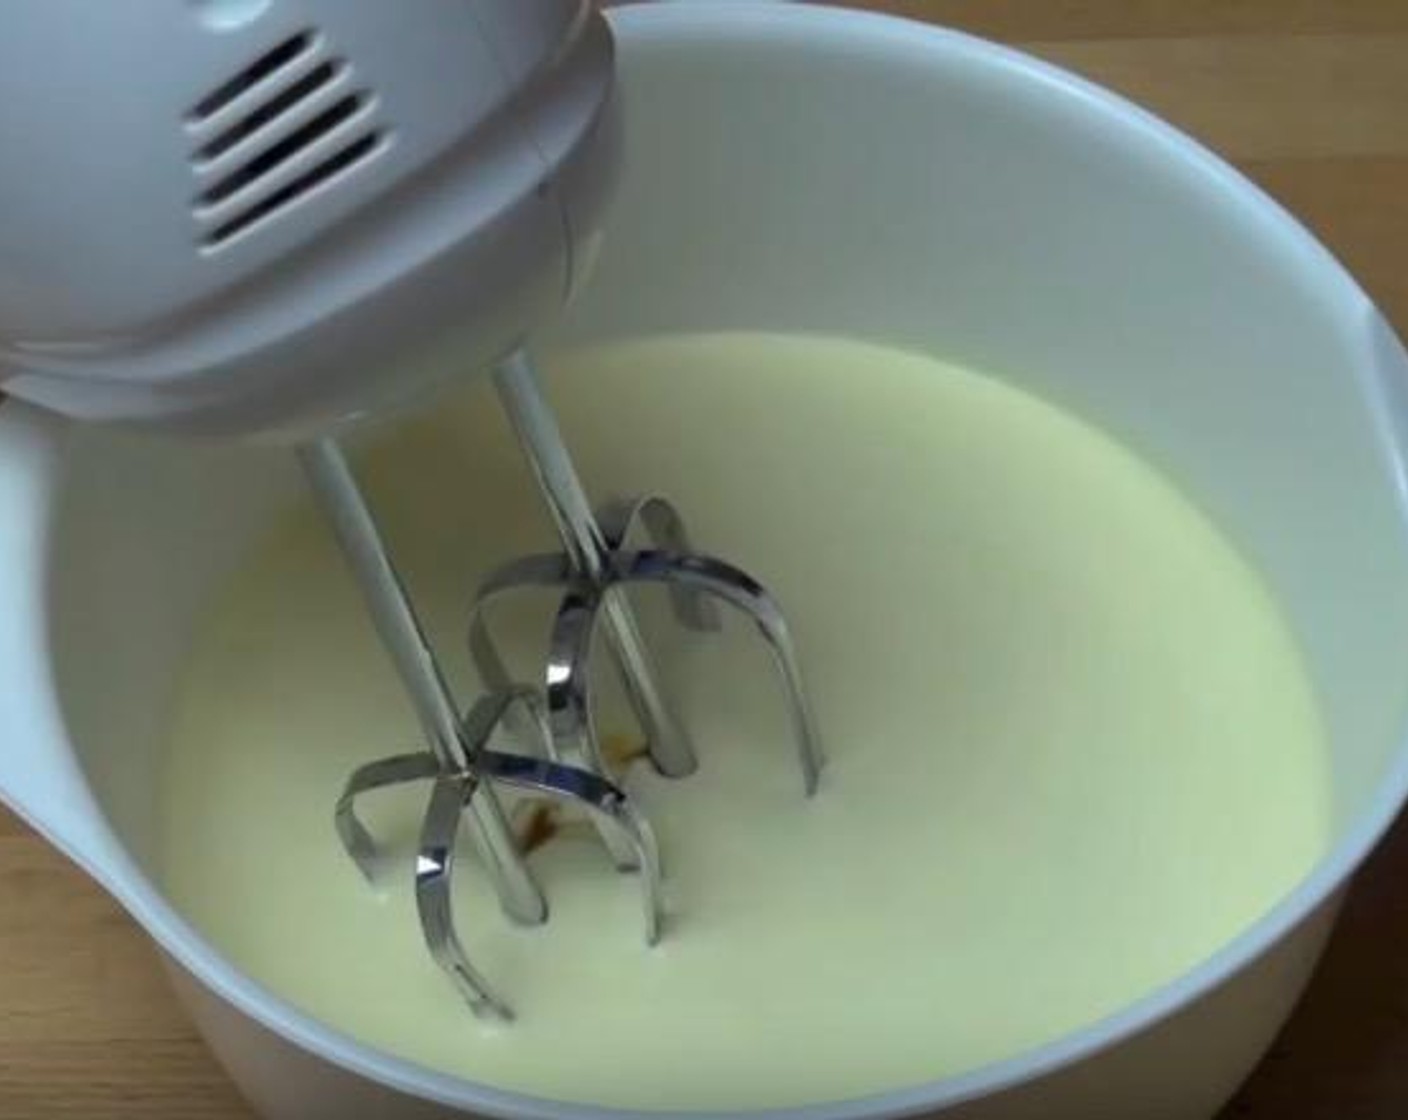 step 5 In a mixing bowl, add Thickened Cream (2 1/2 cups) and Vanilla Extract (1/2 Tbsp). Using an electric mixer, beat until mixture forms soft peaks.